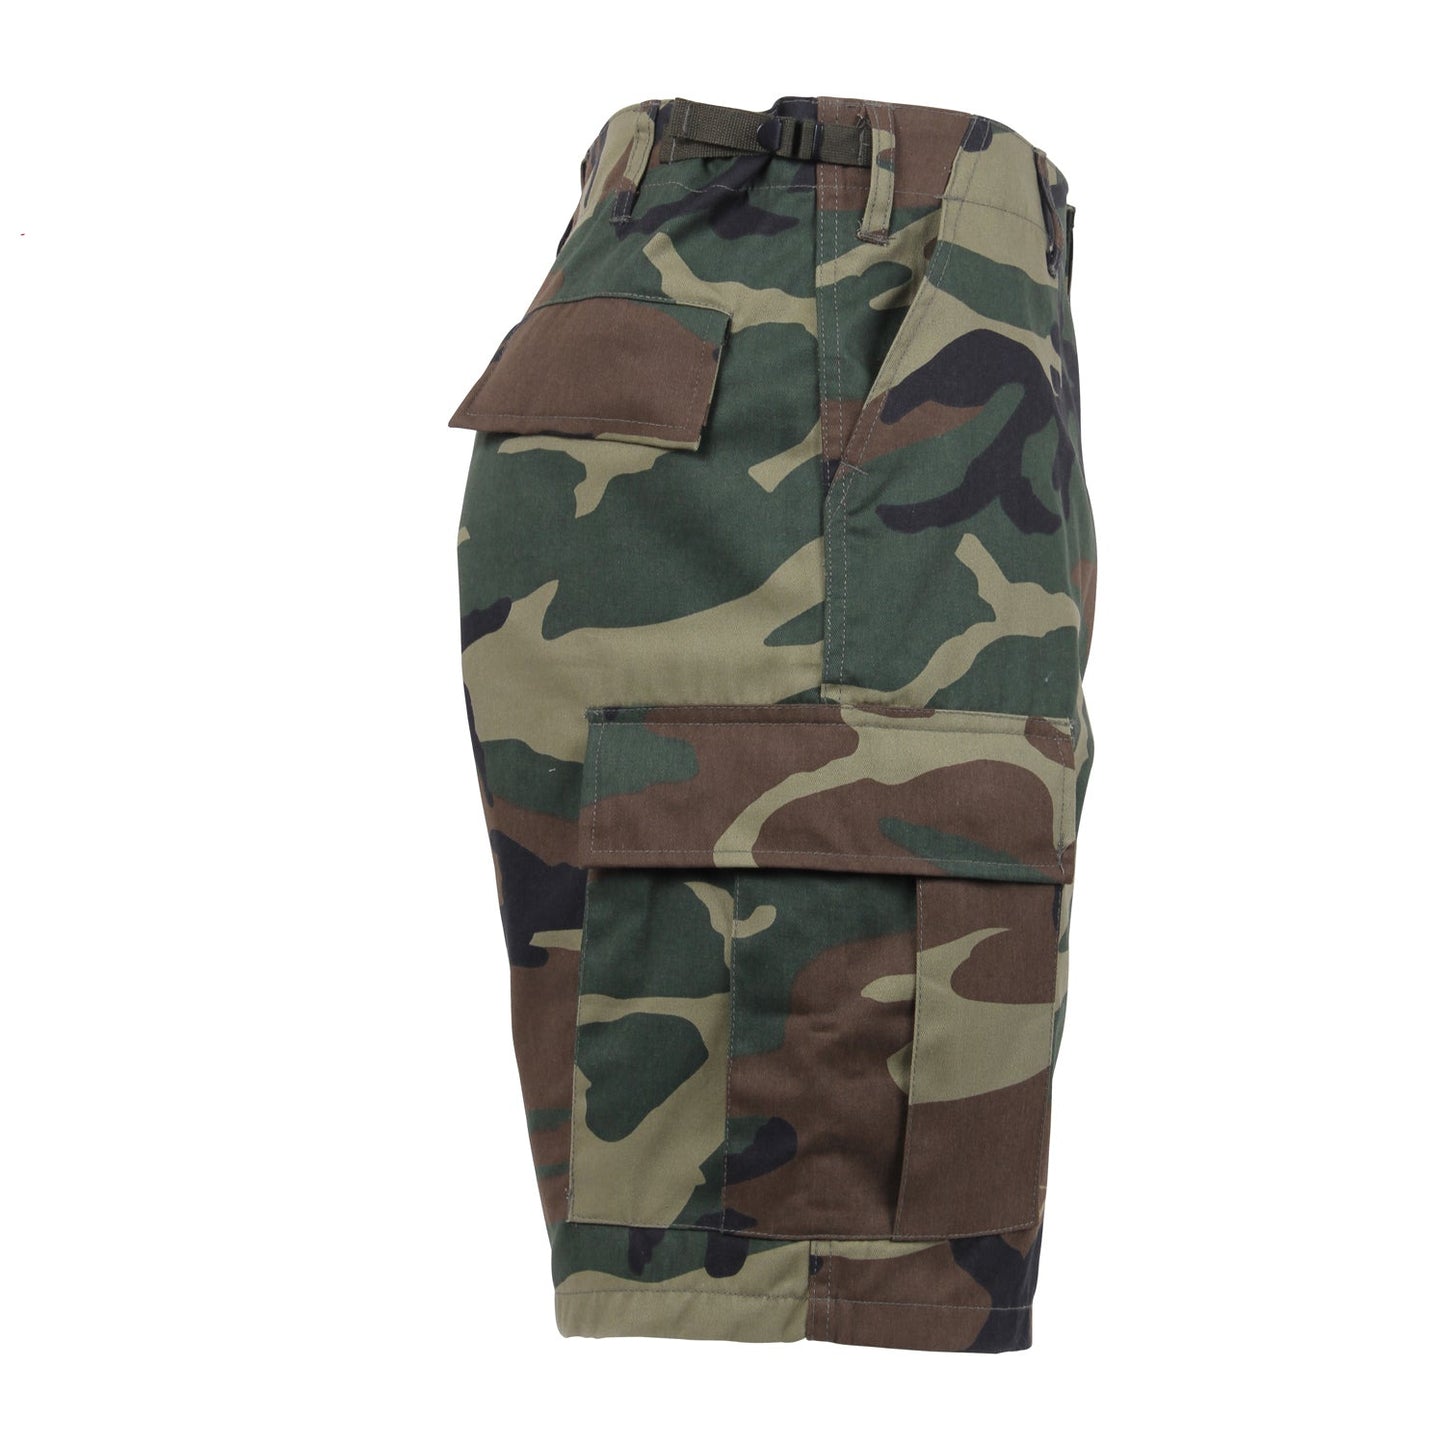 Rothco’s classic military BDU shorts in camouflage are the perfect combination of form and function and are available in several different camo patterns. 